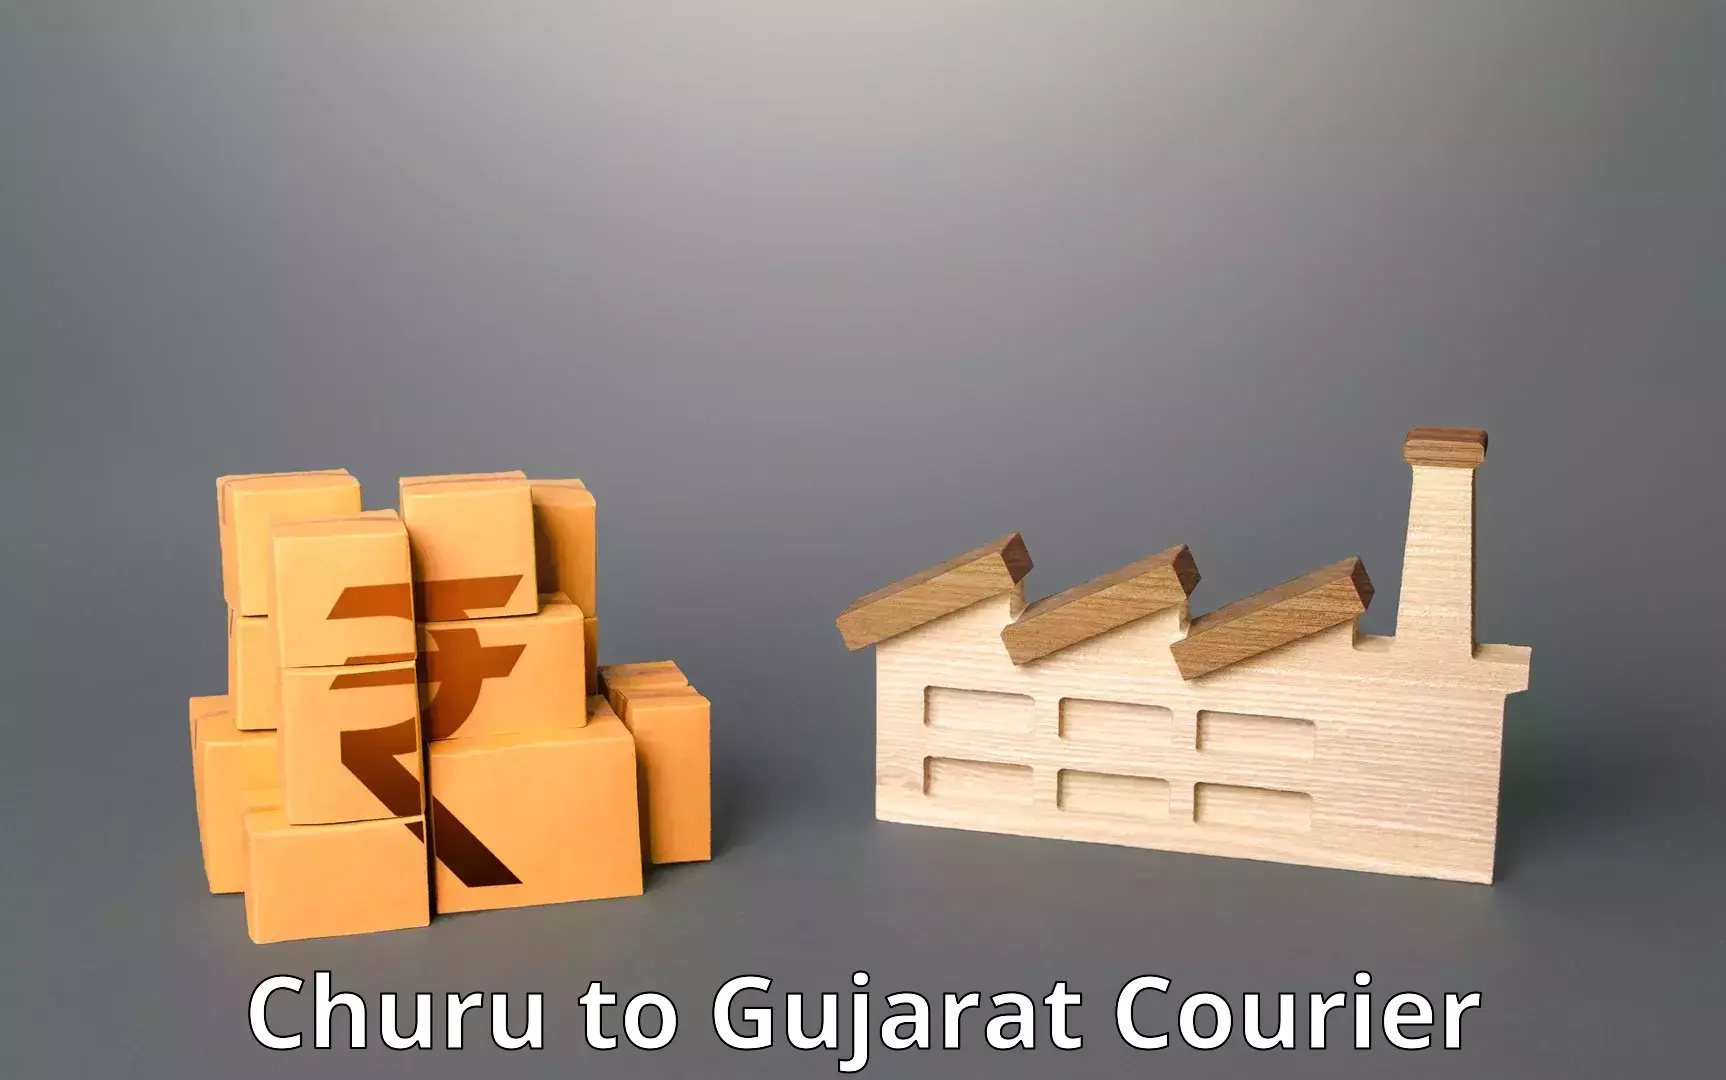 End-to-end delivery Churu to Ahmedabad